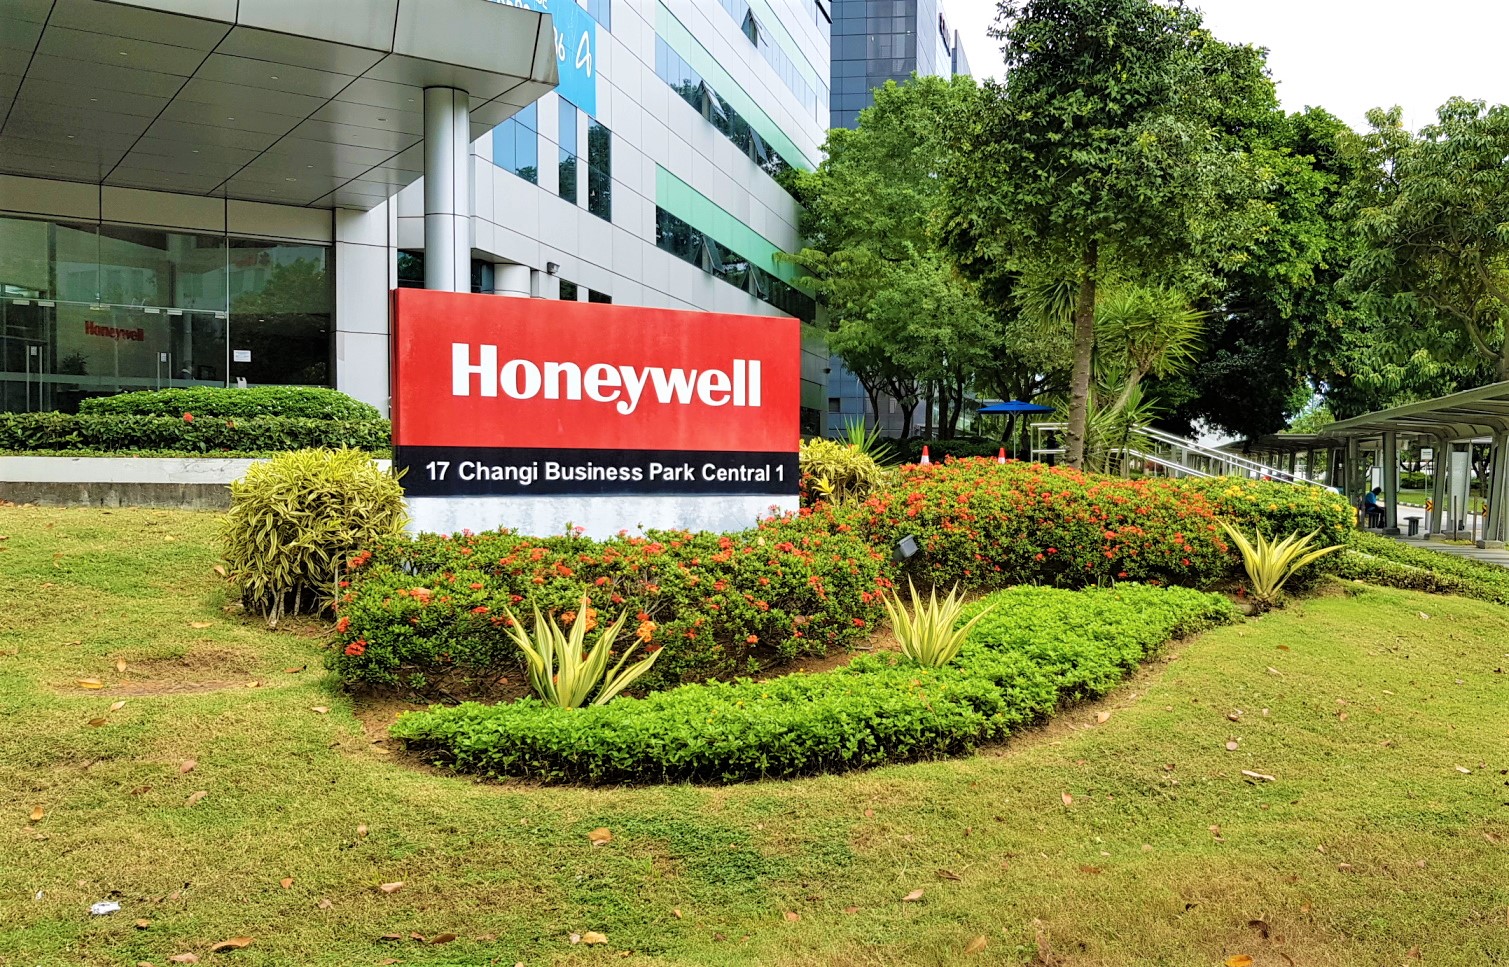 Honeywell changi business park office for rent